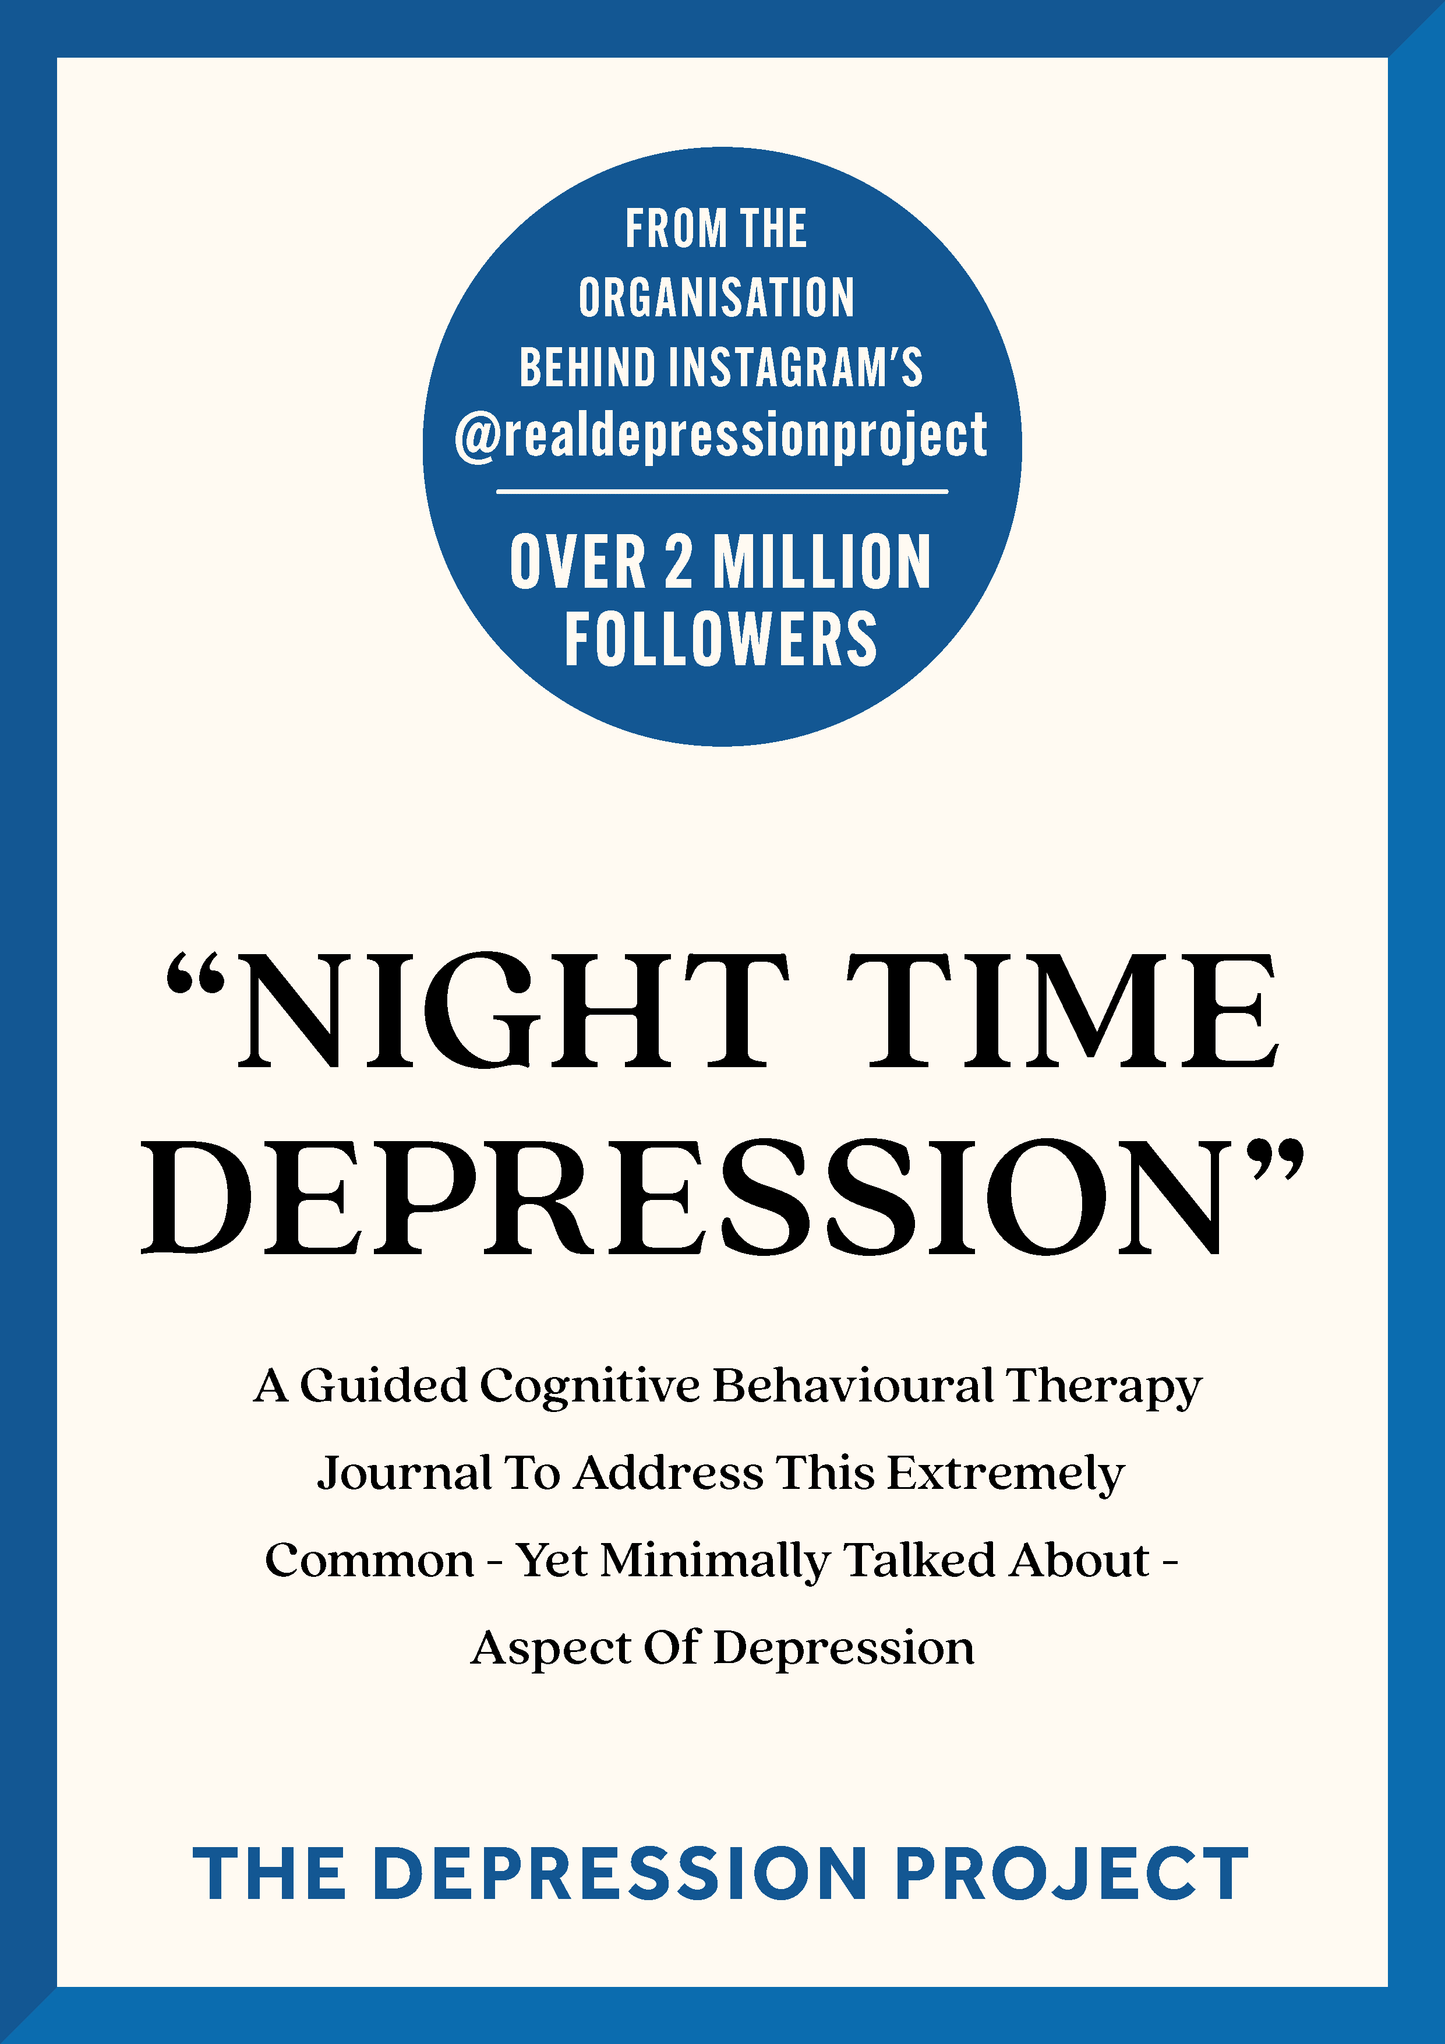 The "Night Time Depression" Journal - The Depression Project